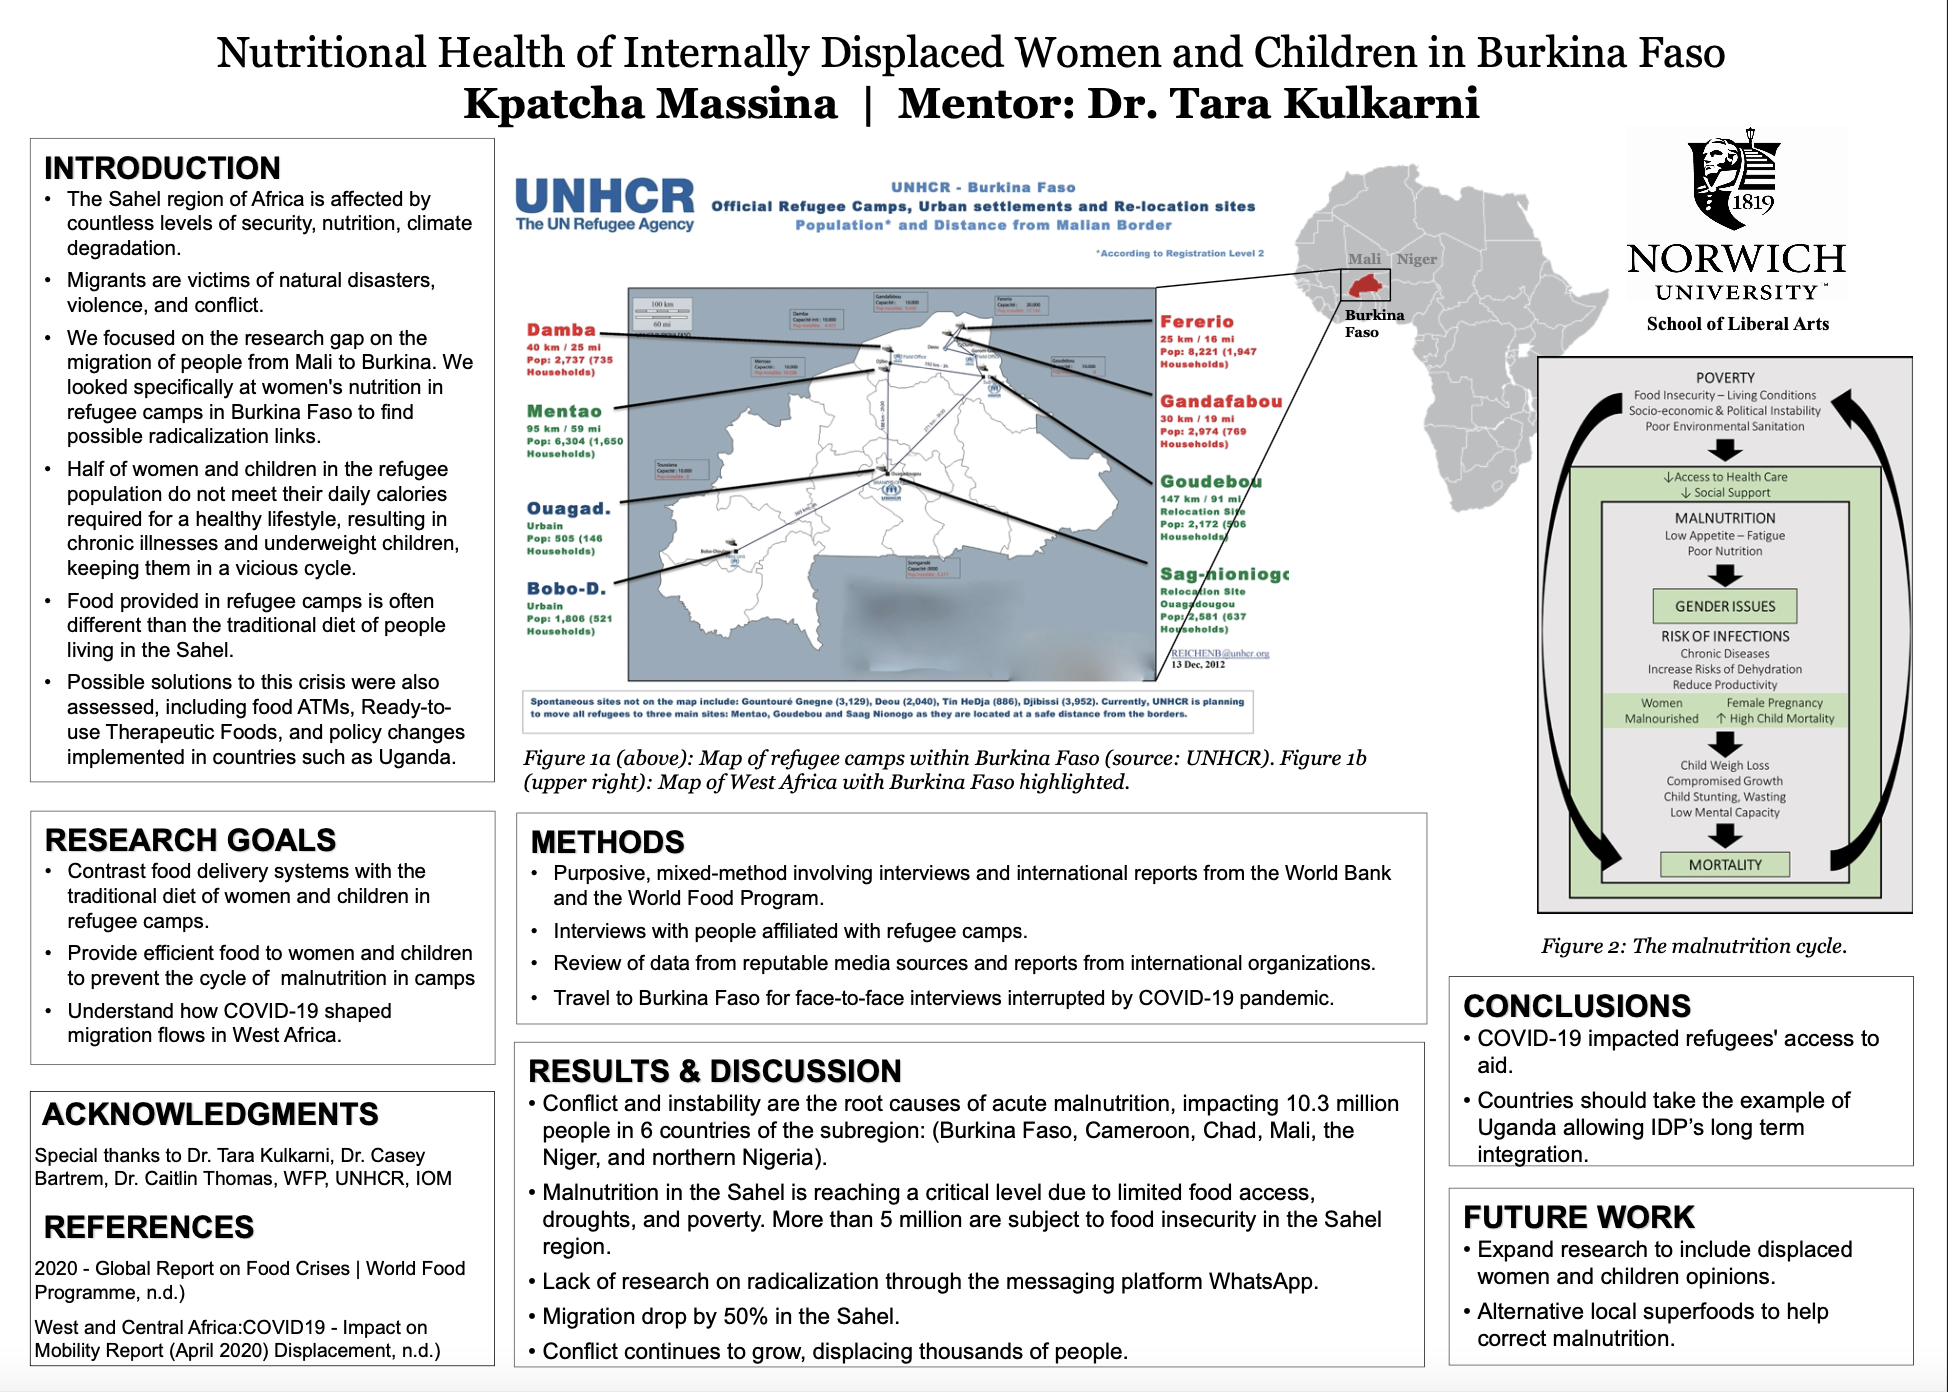 Showcase Image for Nutritional Health of Internally Displaced Women and Children in Burkina Faso